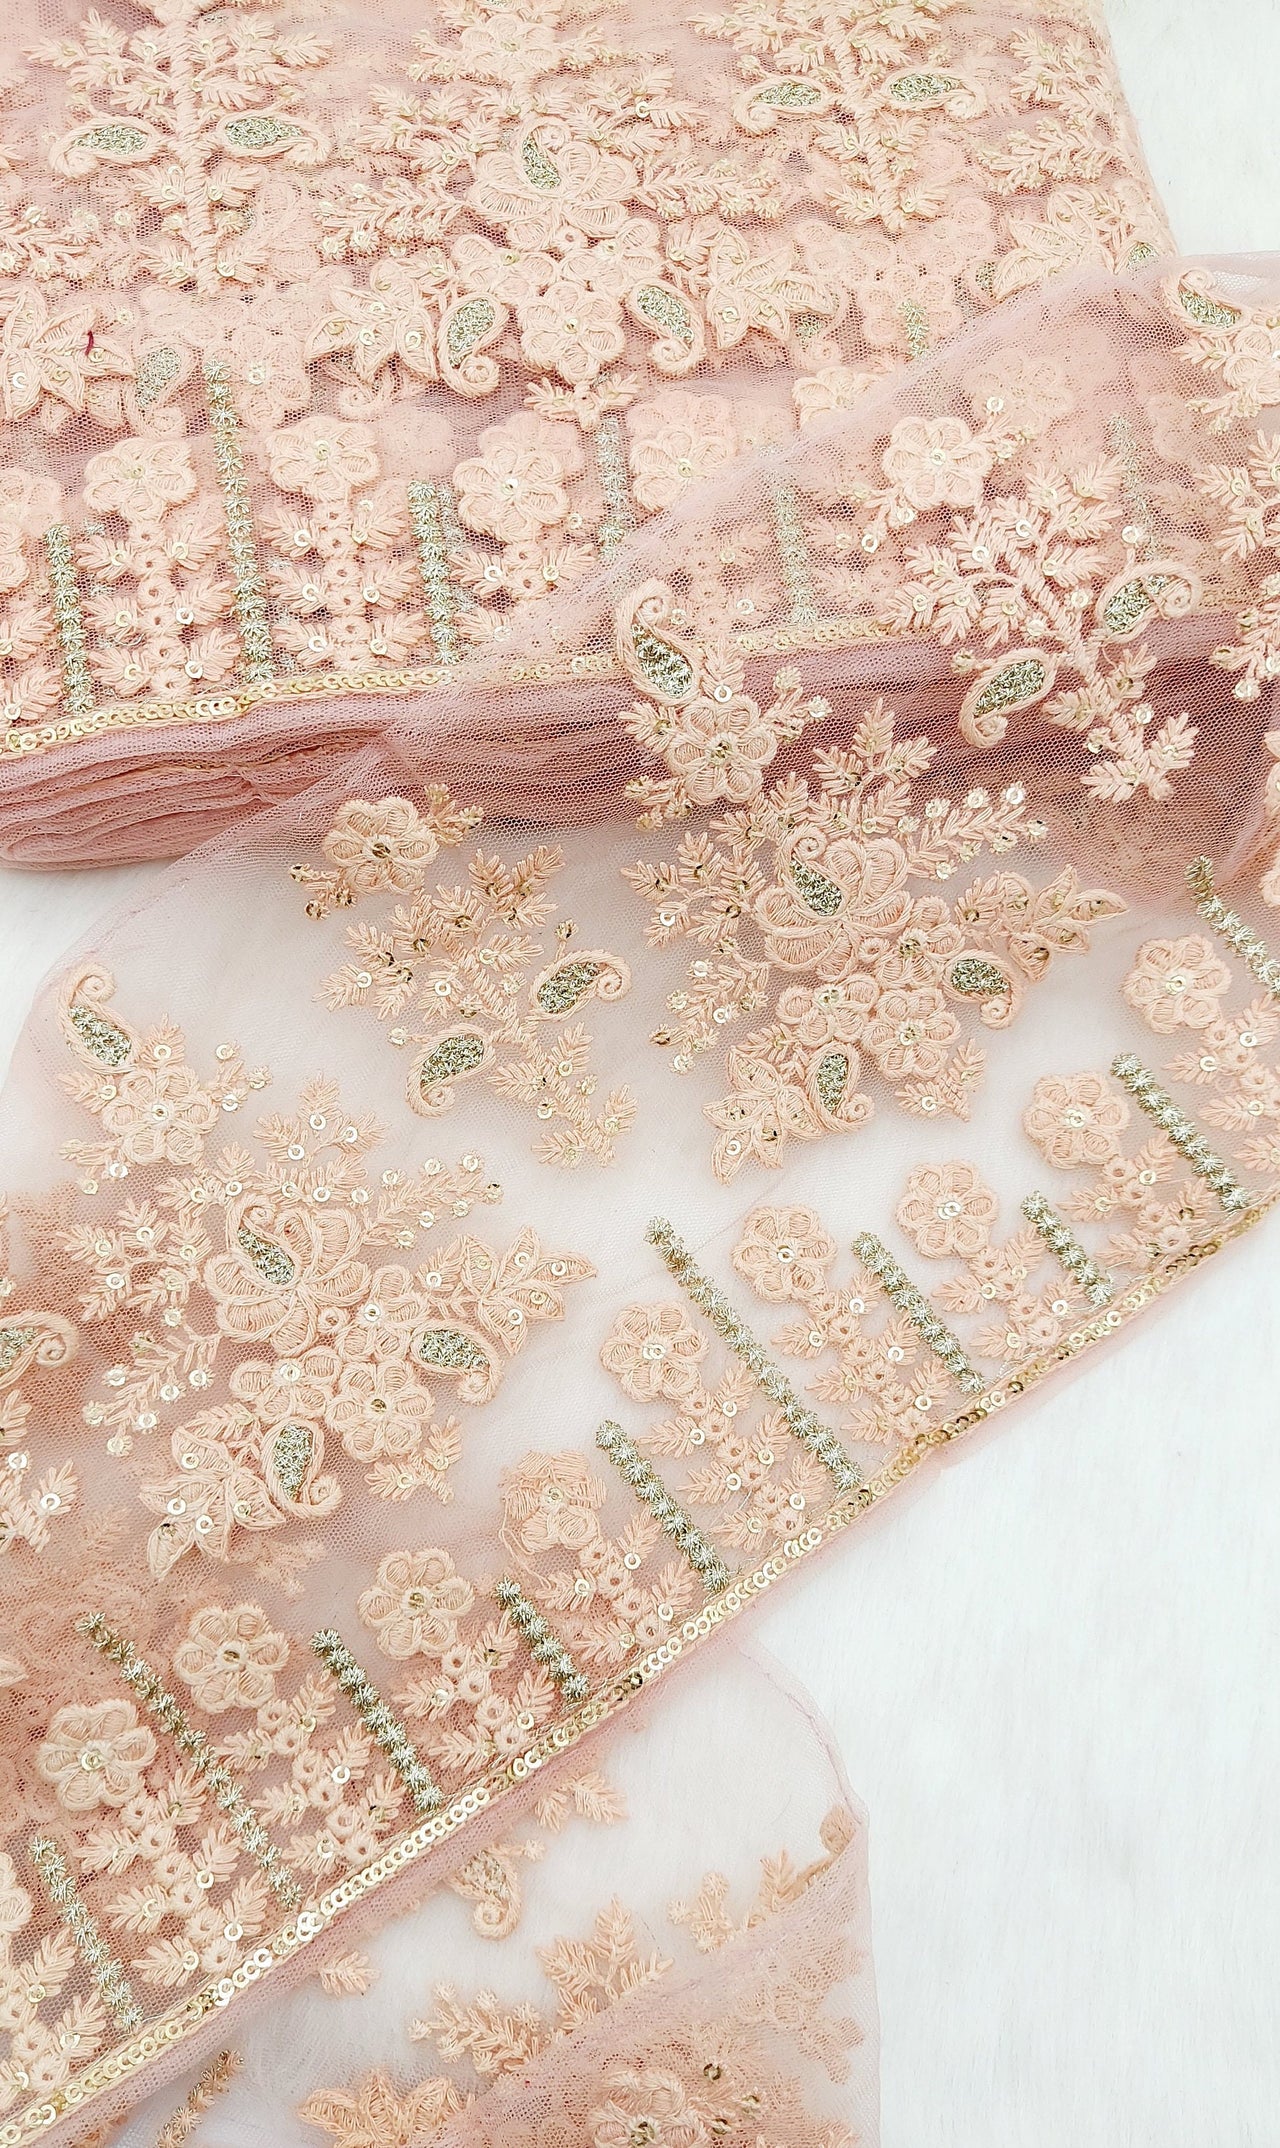 9 Yards Peach Net Lace Trim Floral Embroidery and Gold Sequins, Floral Sari Border, Decorative Trim